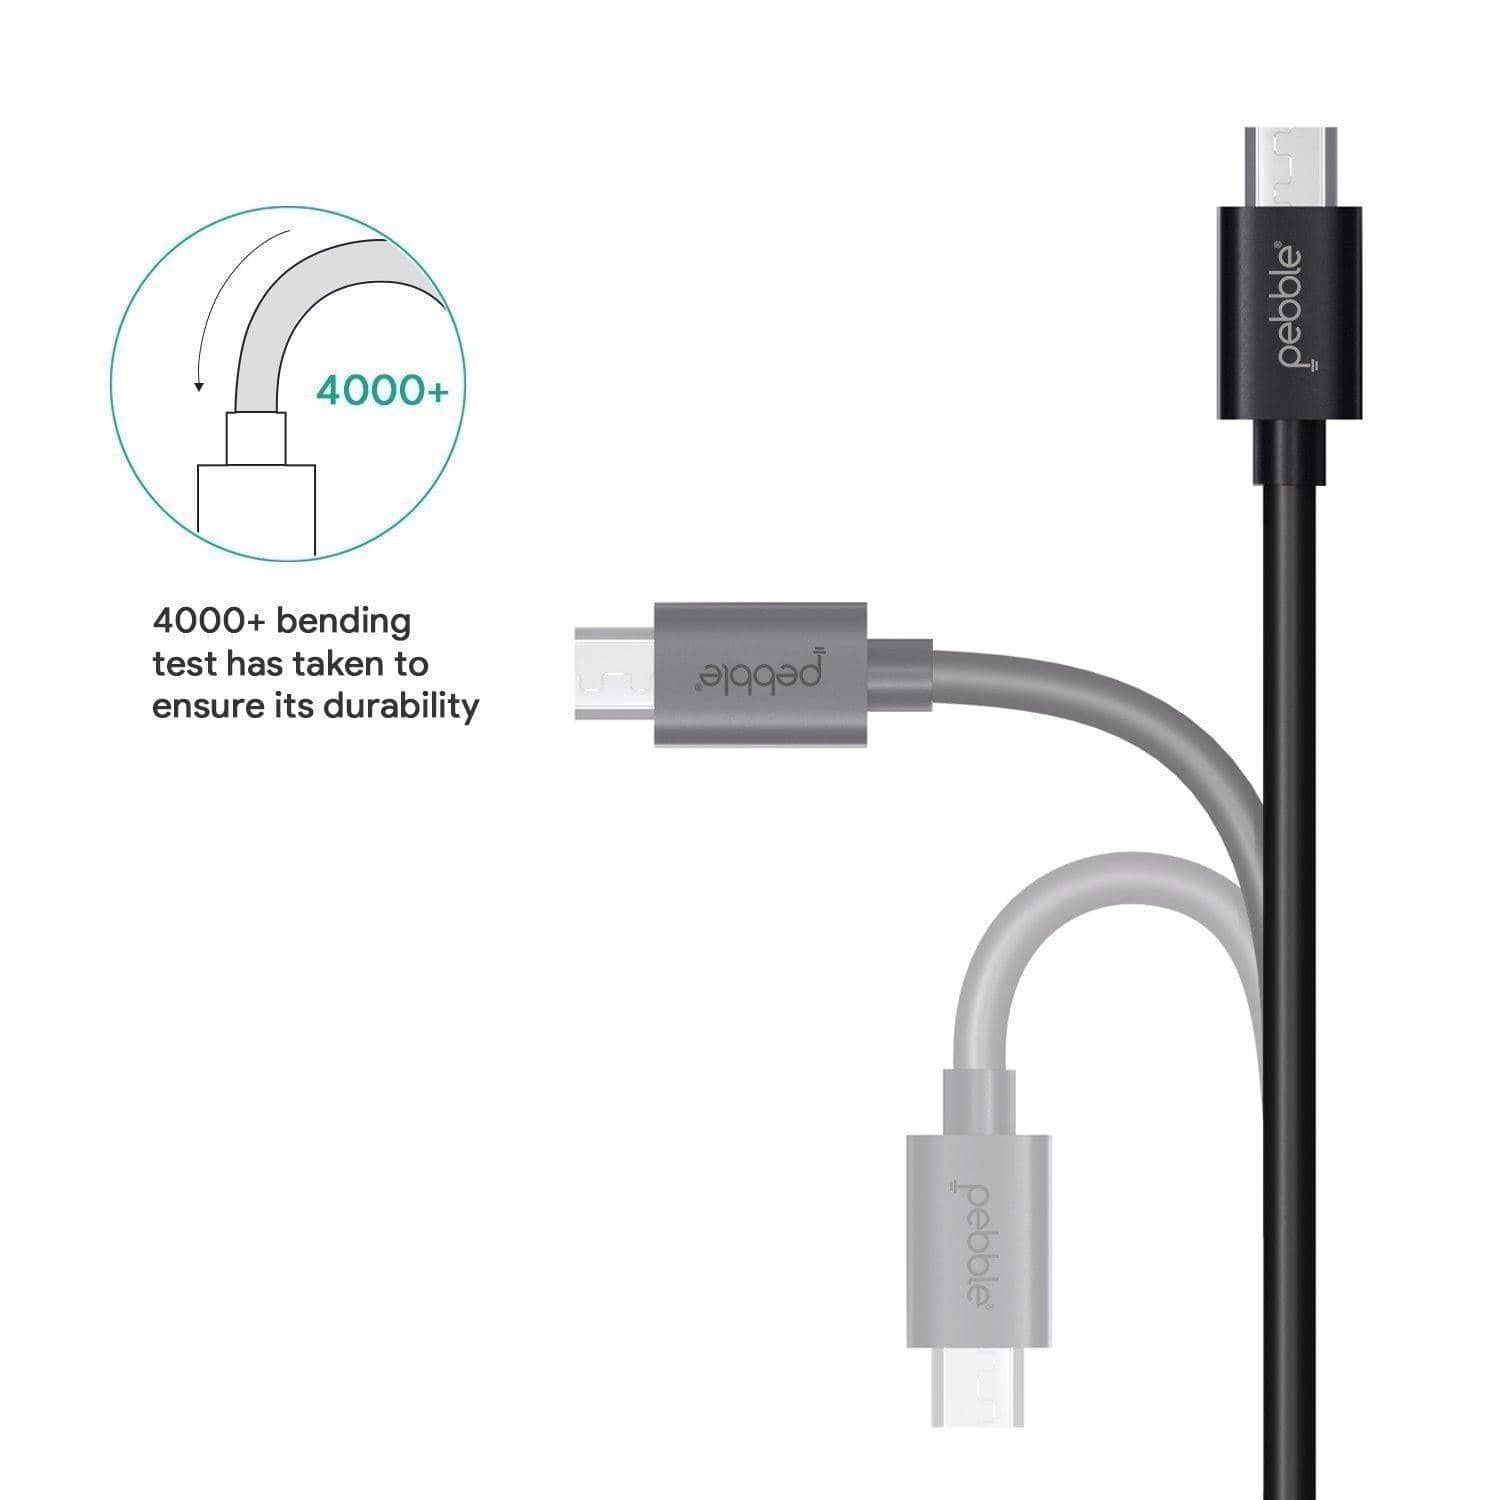 Pebble Micro USB Cable 1 meter PBCM10-USB Charging Transfer cable-dealsplant